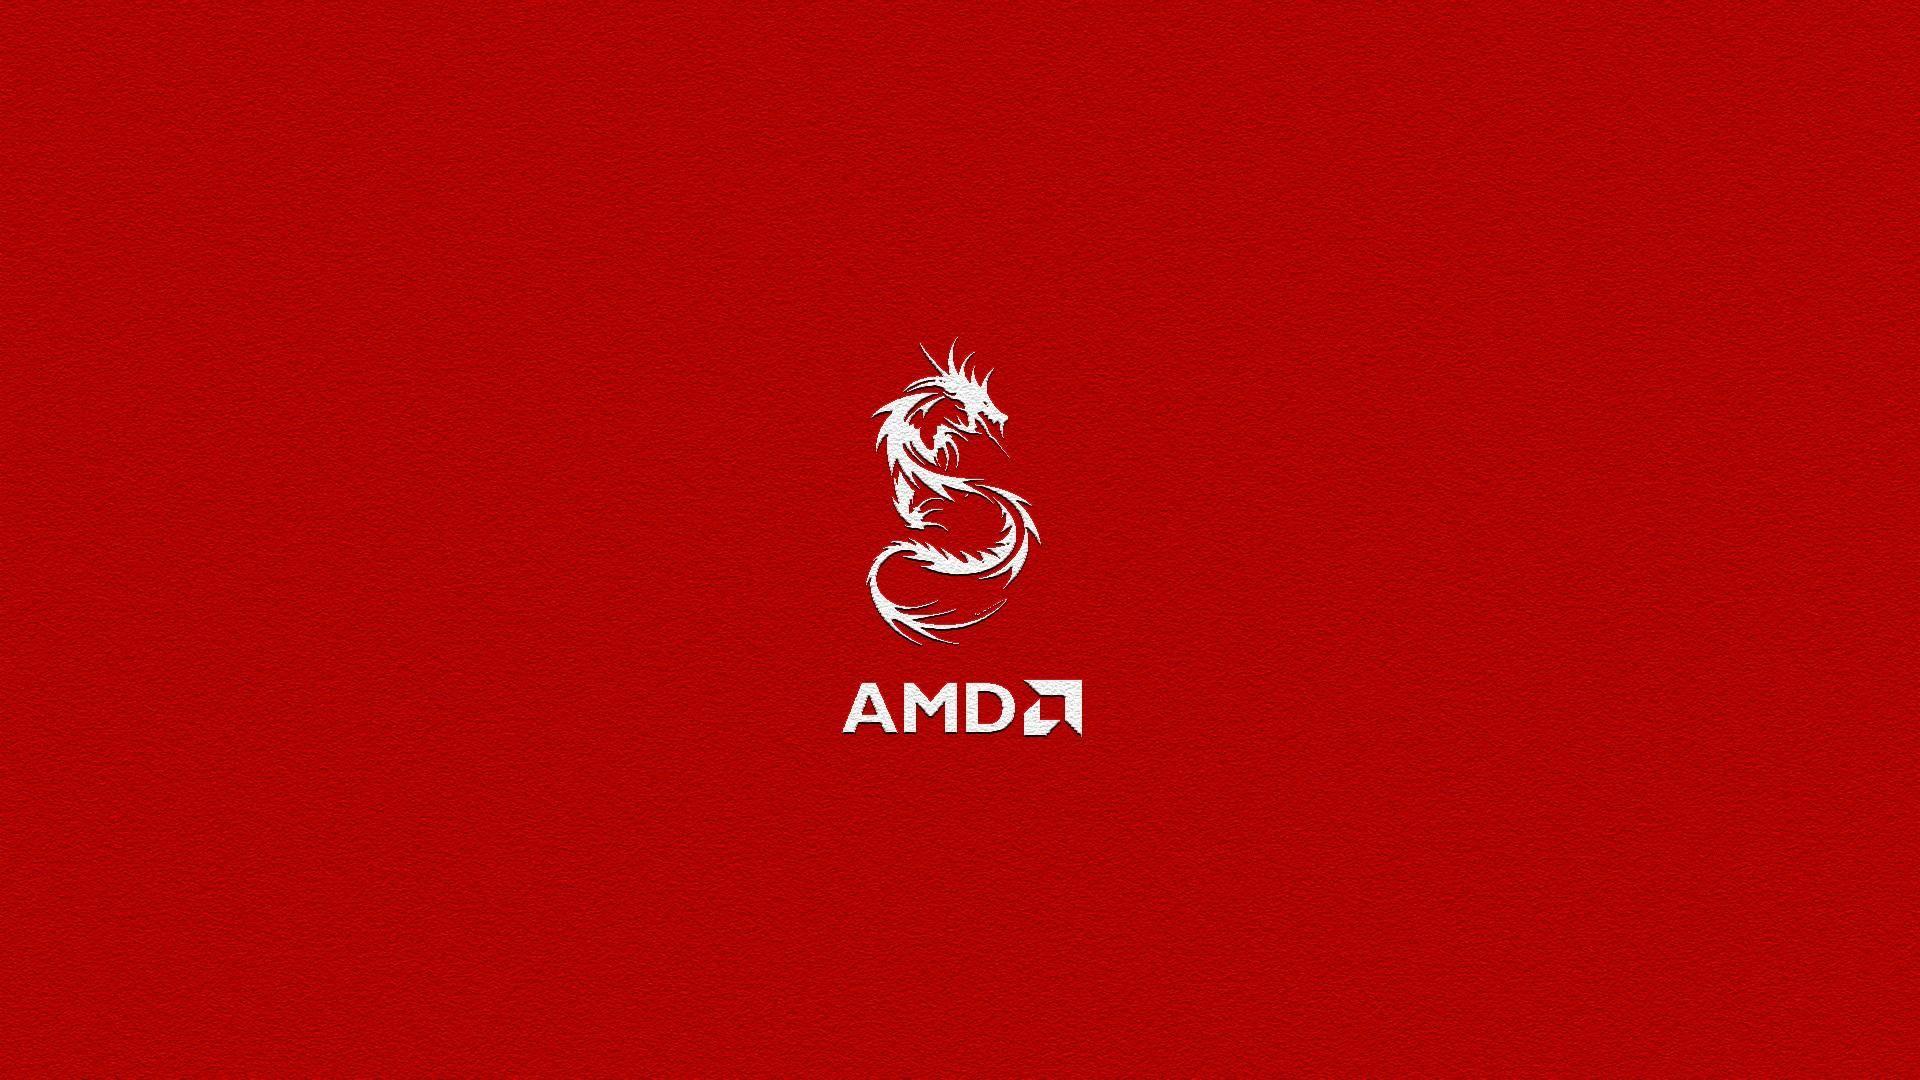 AMD Red Logo - Computers brands logos components amd red background logo wallpaper ...